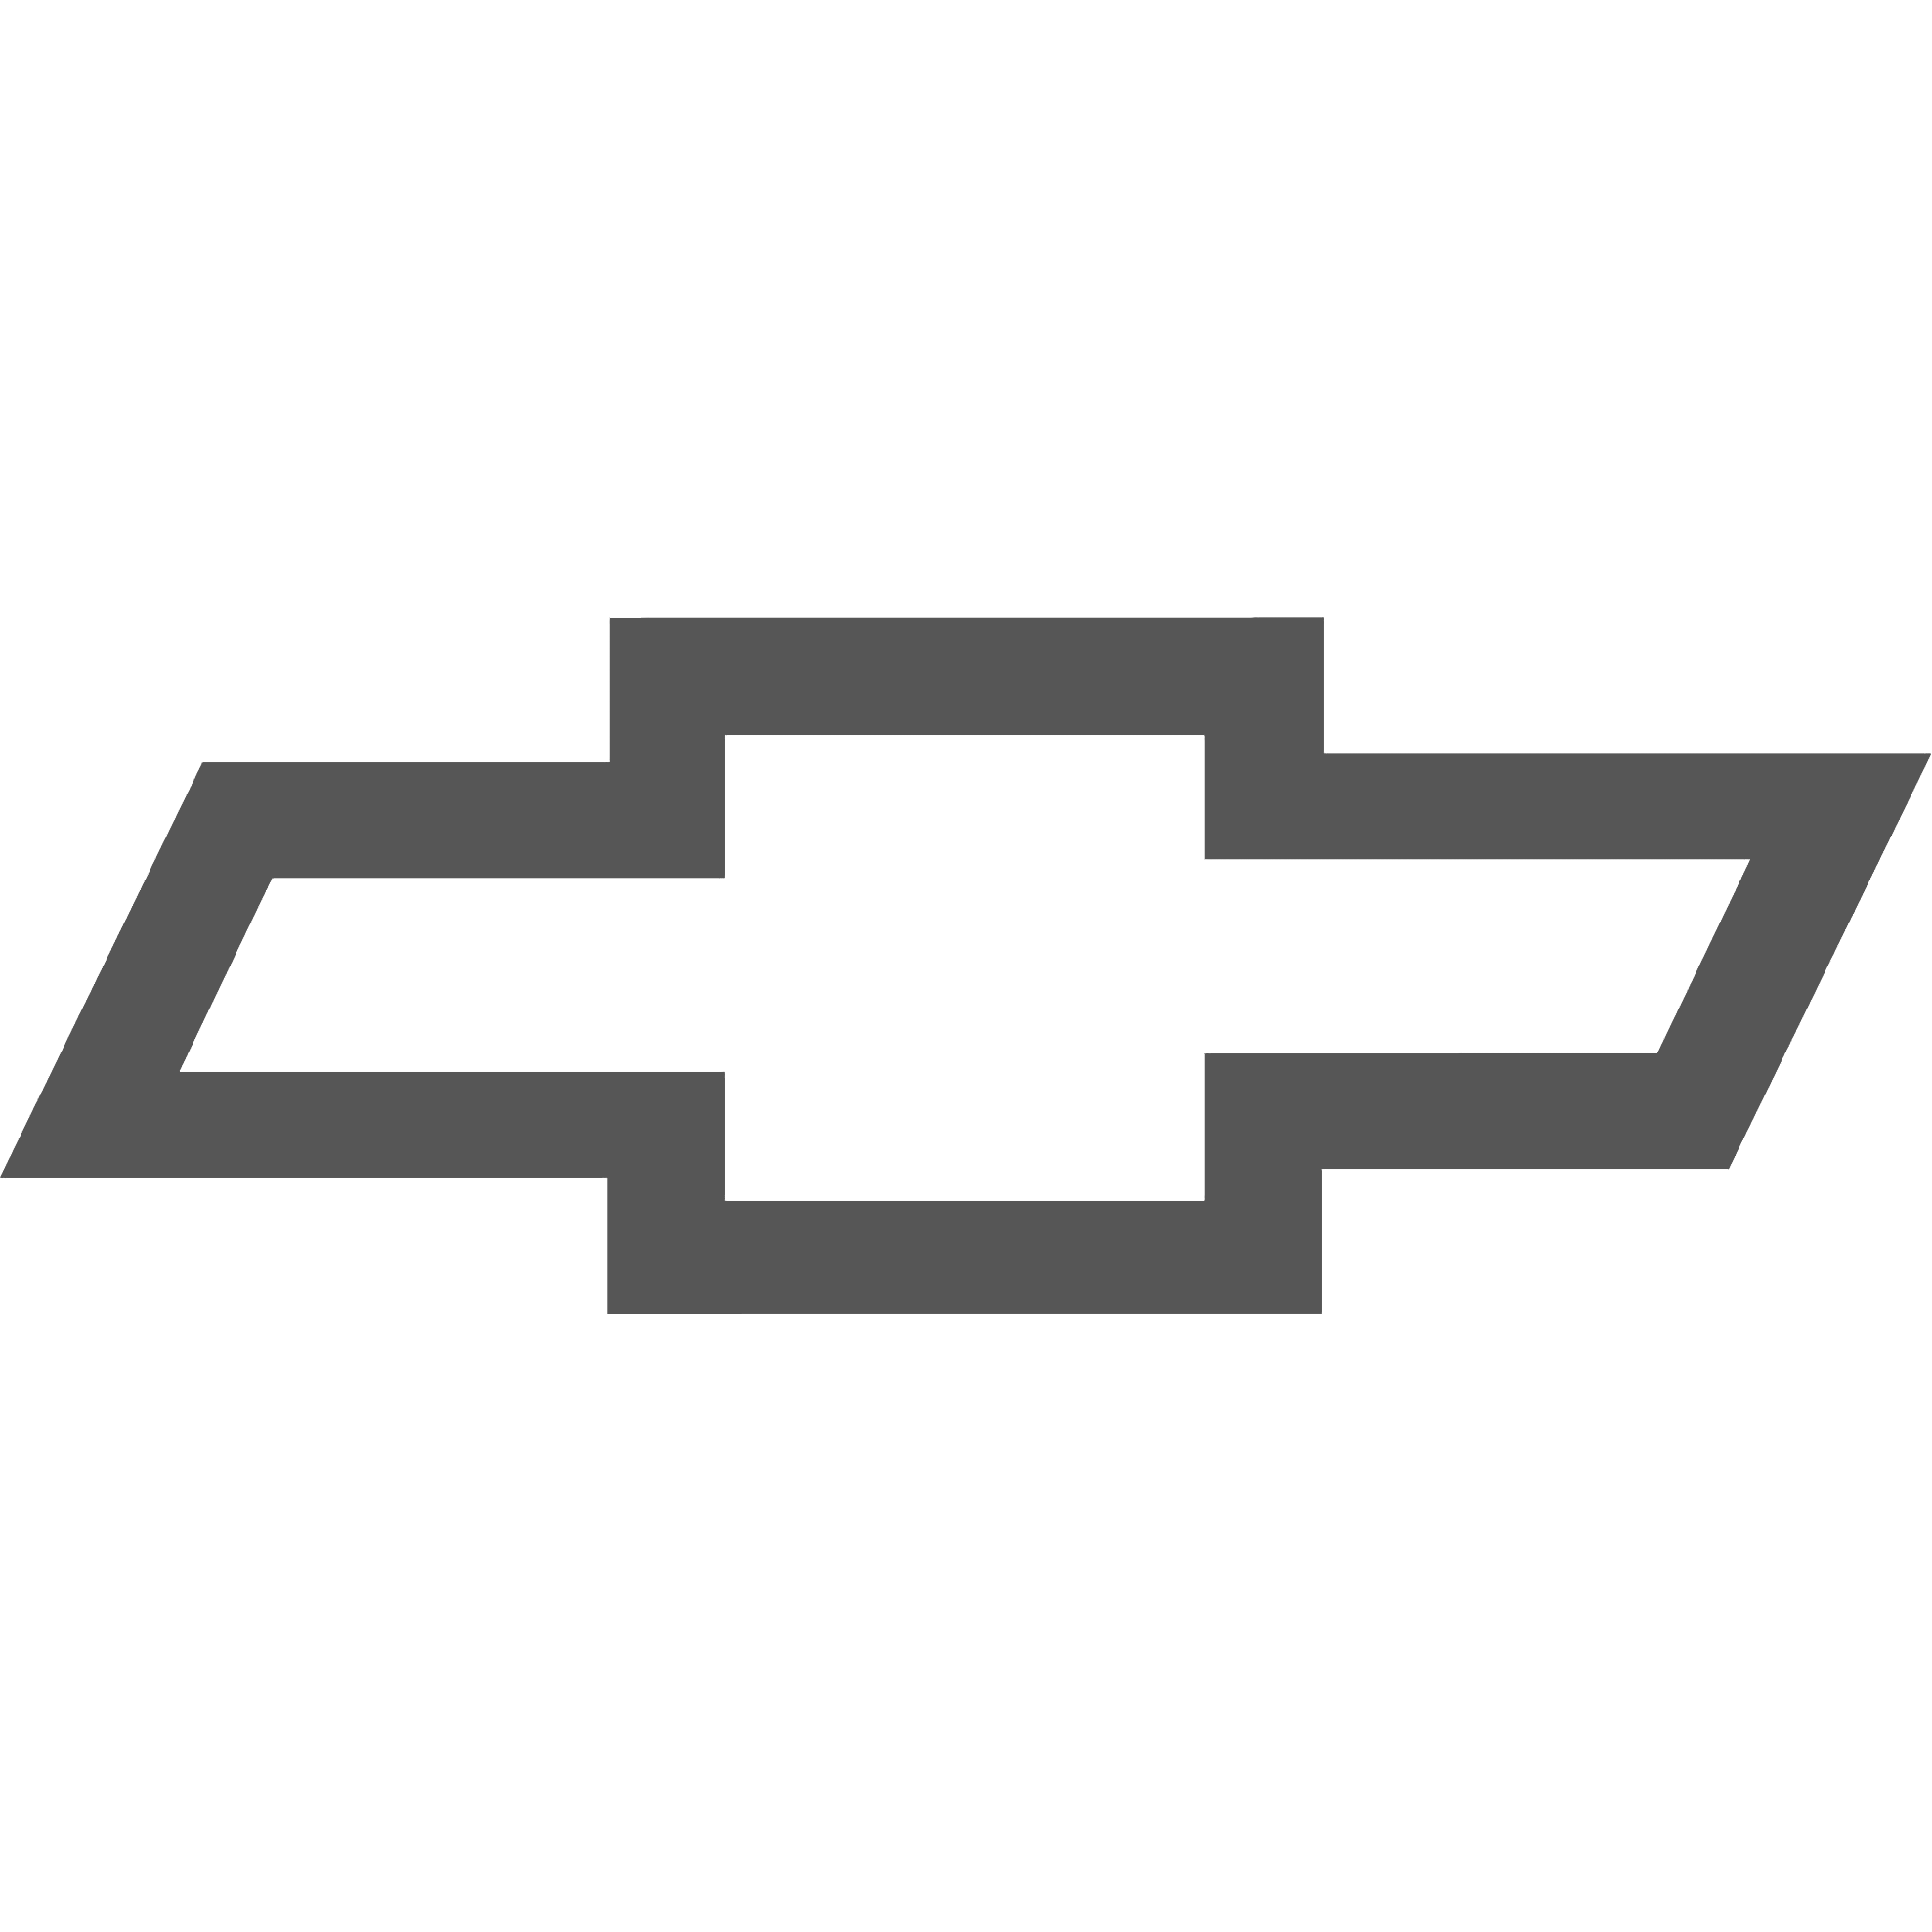 Chevy filled logo clipart black and white